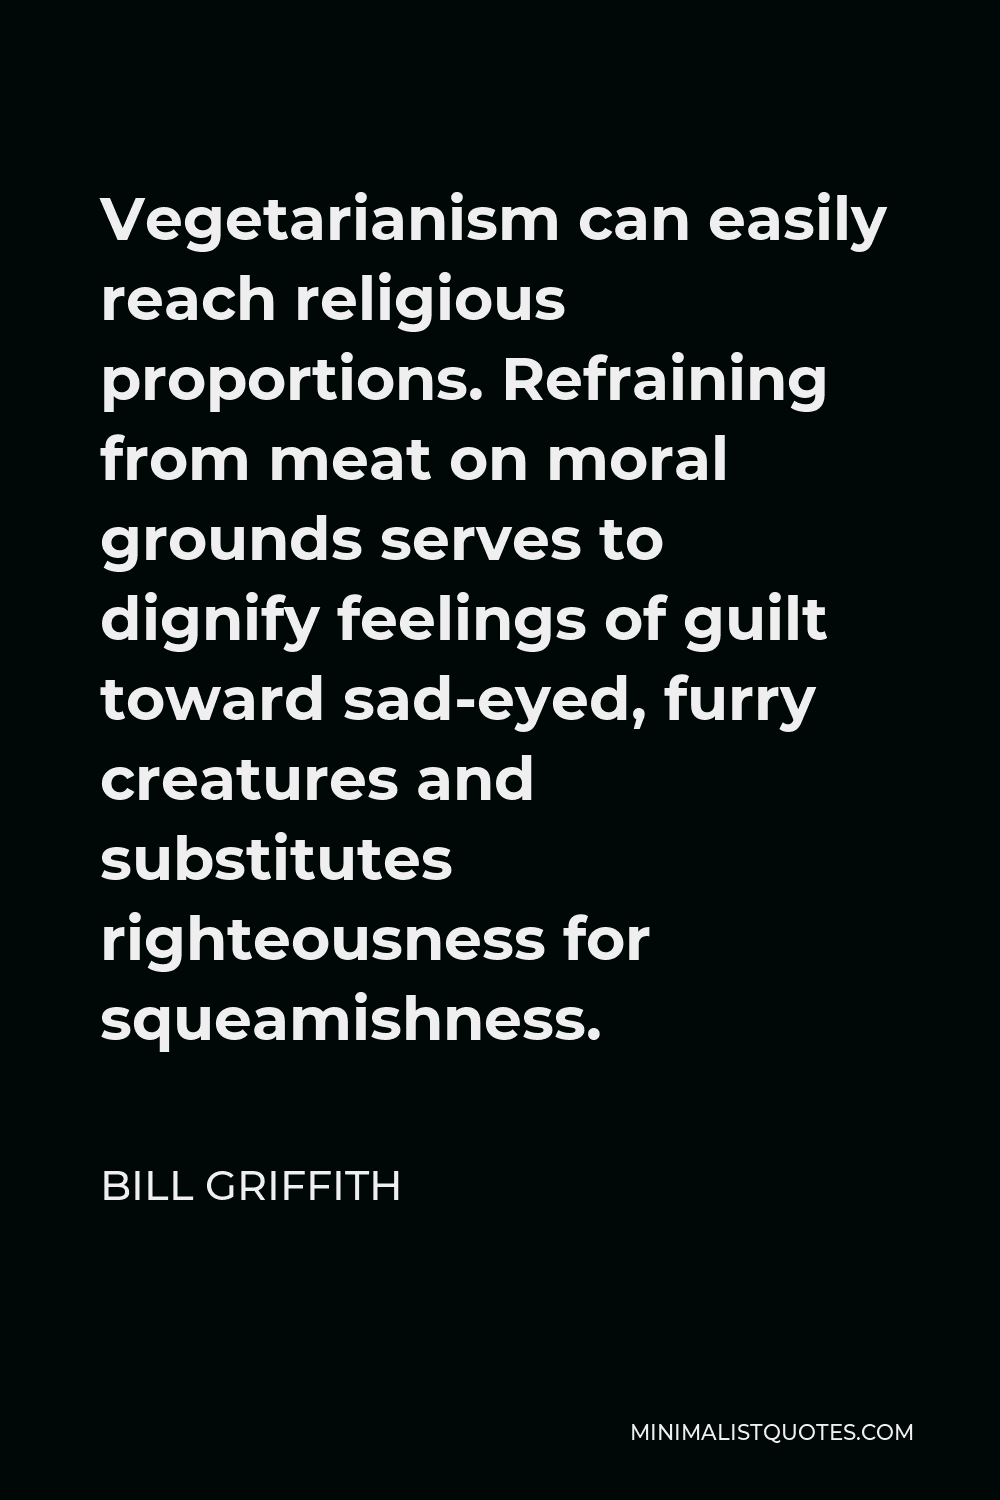 Bill Griffith Quote - Vegetarianism can easily reach religious proportions. Refraining from meat on moral grounds serves to dignify feelings of guilt toward sad-eyed, furry creatures and substitutes righteousness for squeamishness.